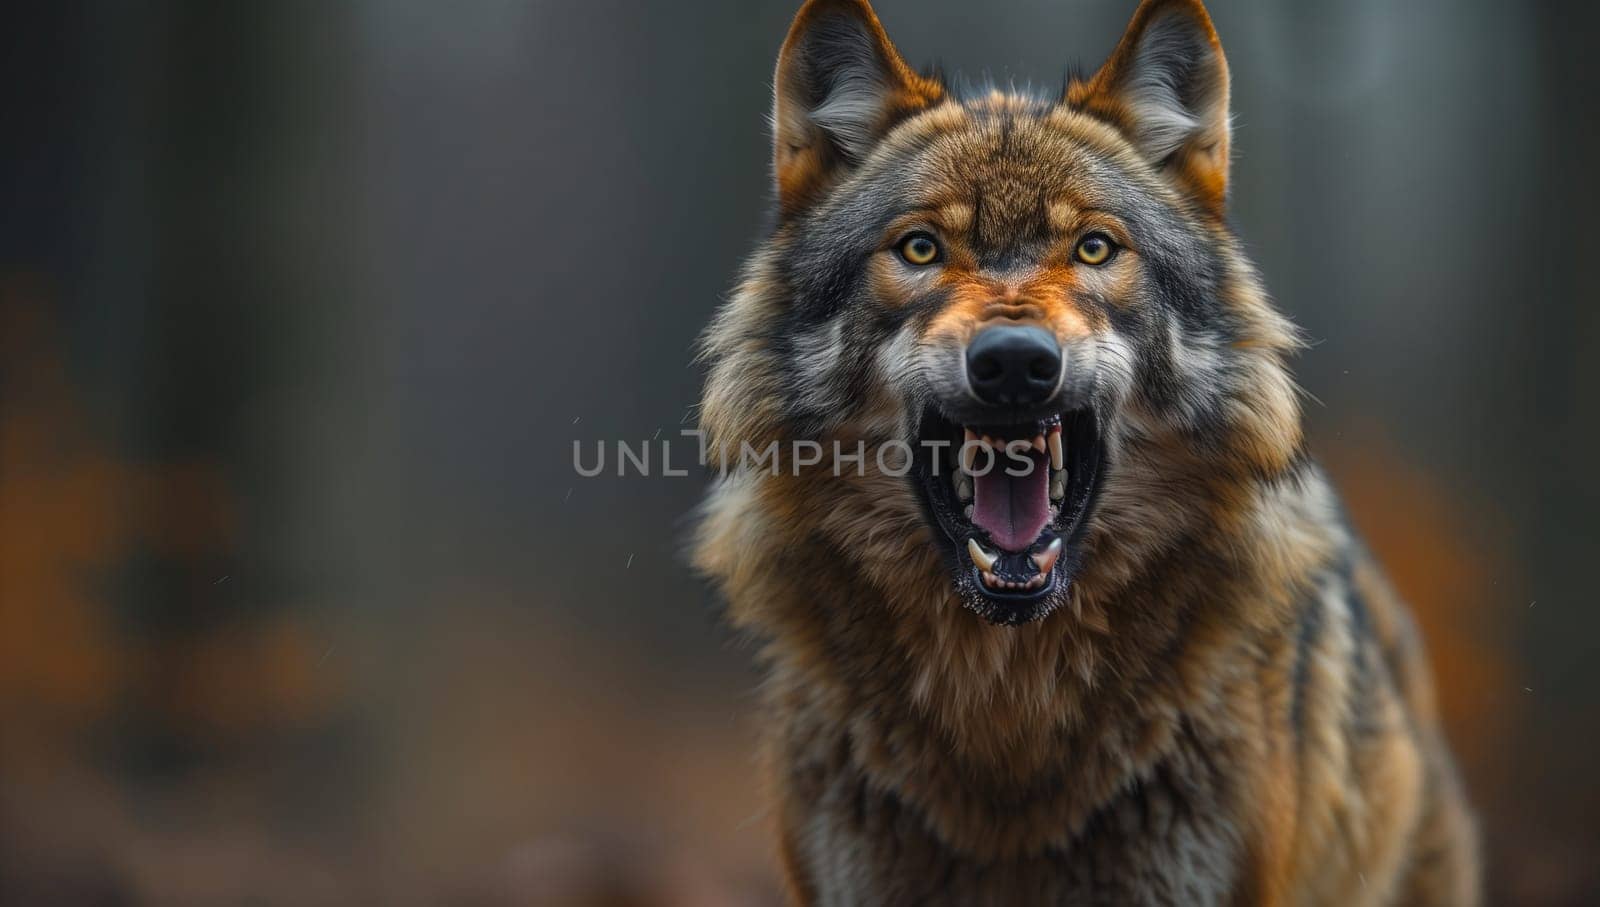 A closeup shot of a Carnivore, Canidae, and terrestrial animal, a wolf showing its fangs and fur while roaring. This Dog breed belongs to the Sporting Group and is known for its biting behavior